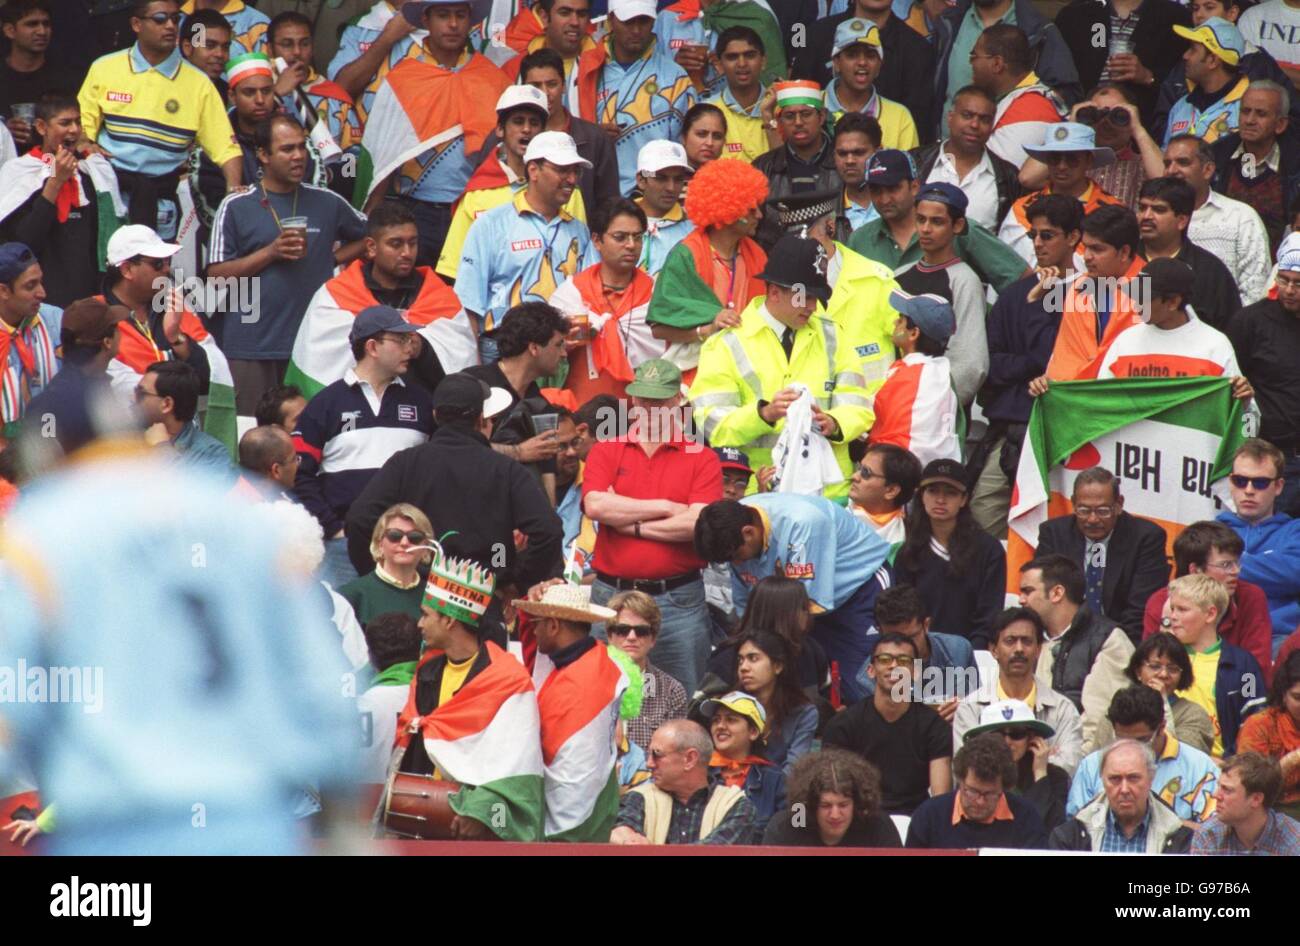 The police make their presence felt amongst the India fans Stock Photo